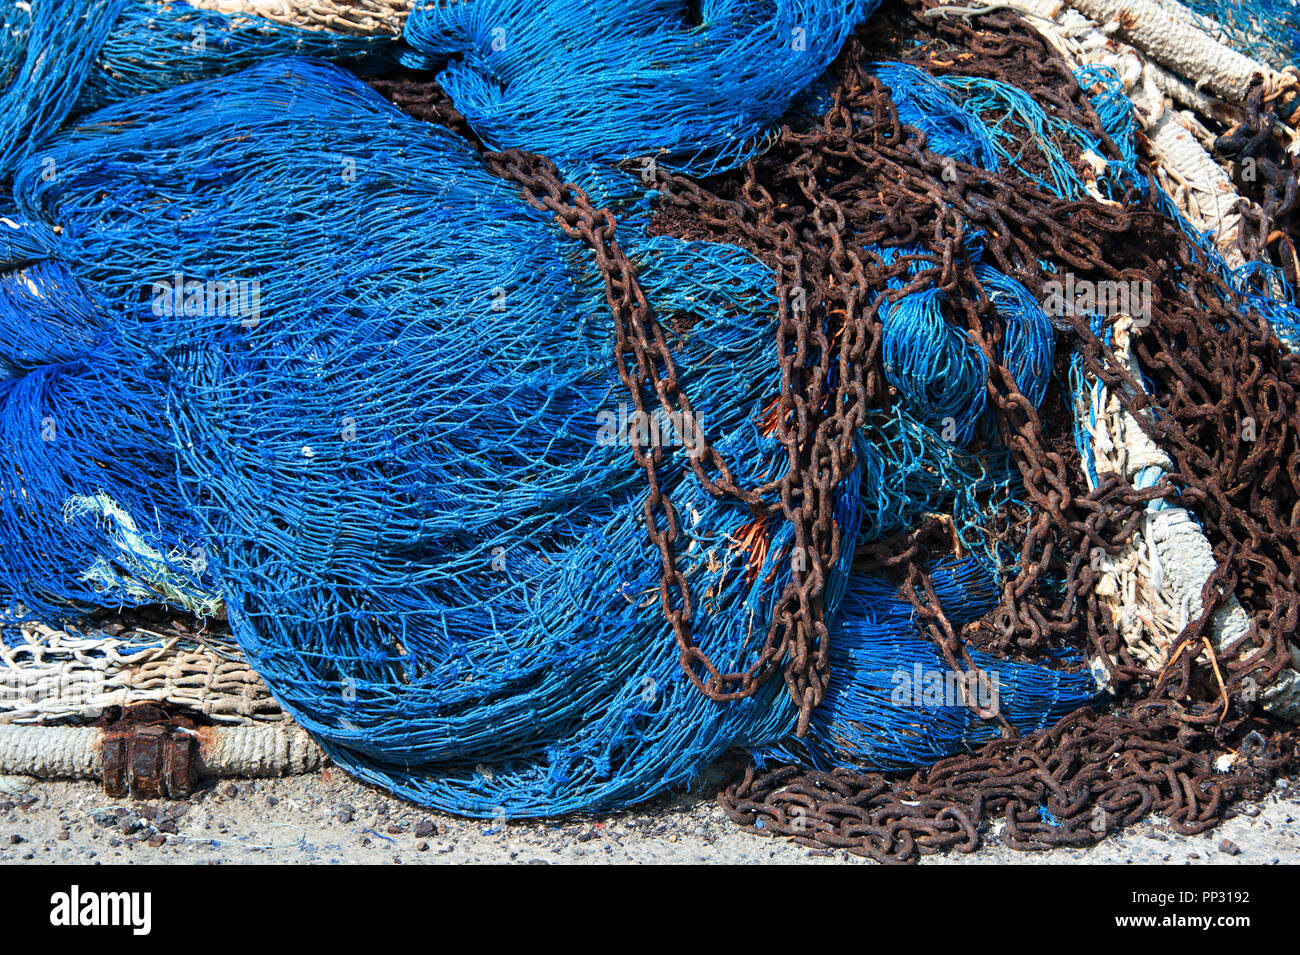 https://c8.alamy.com/comp/PP3192/colourful-fishing-nets-and-metal-chains-used-to-trawl-fish-by-fisherman-PP3192.jpg